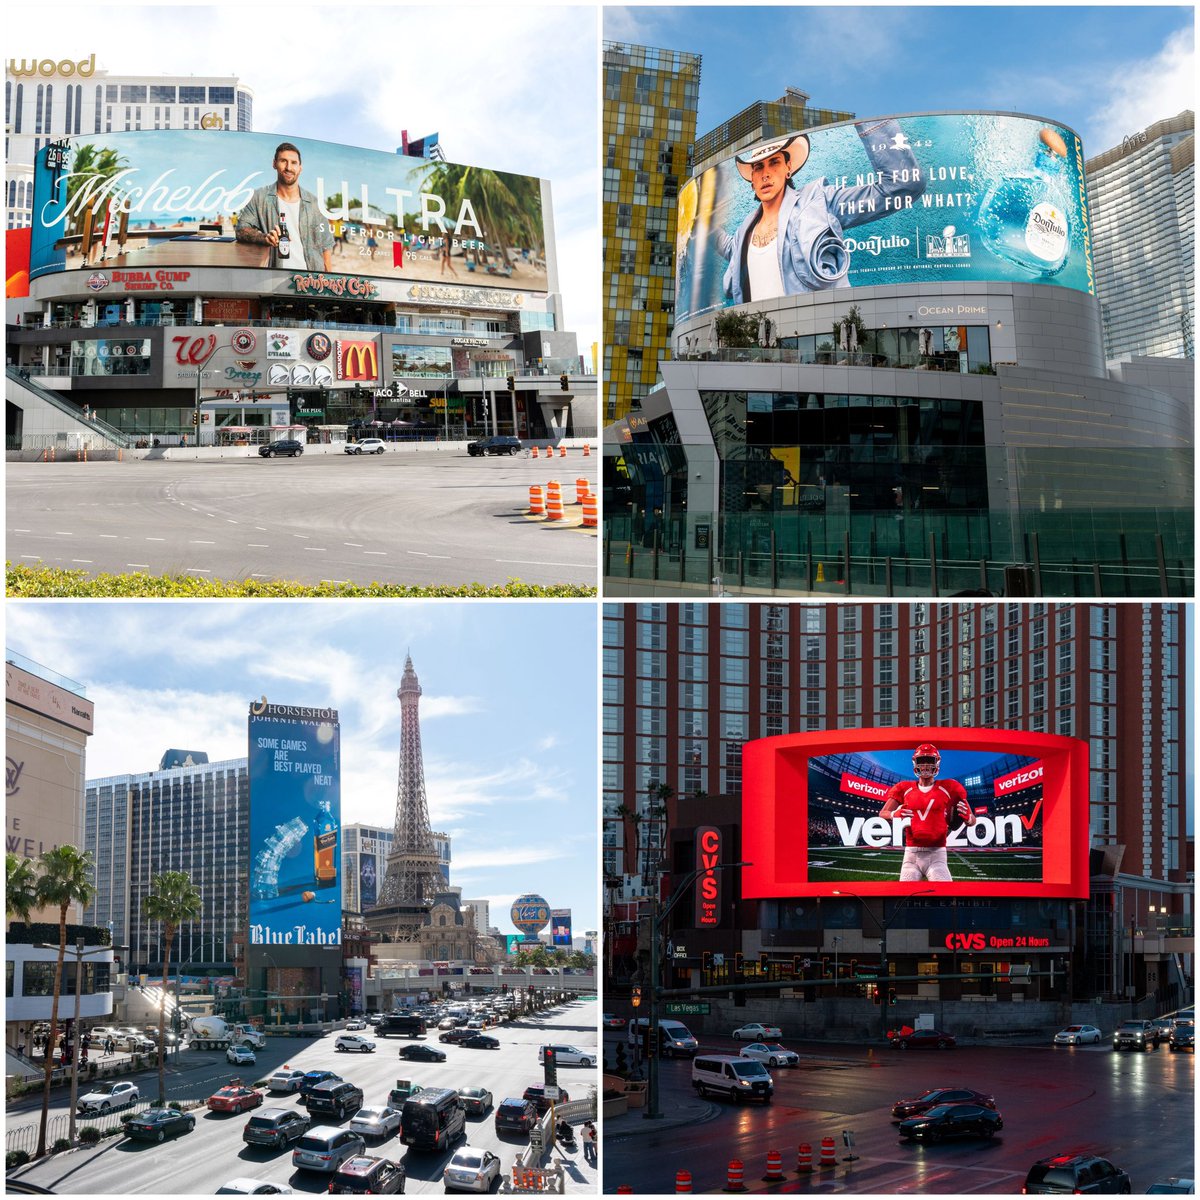 Branded Cities’ Four of a Kind digital spectacular network in Las Vegas is ready for this weekend’s Big Game!

Stay tuned for our comprehensive sizzle reel!

#ooh #dooh #digital #lasvegas #harmoncorner #bLVd #63LV #TheHorseshoe #FourOfAKind #lasvegasstrip #football #biggame